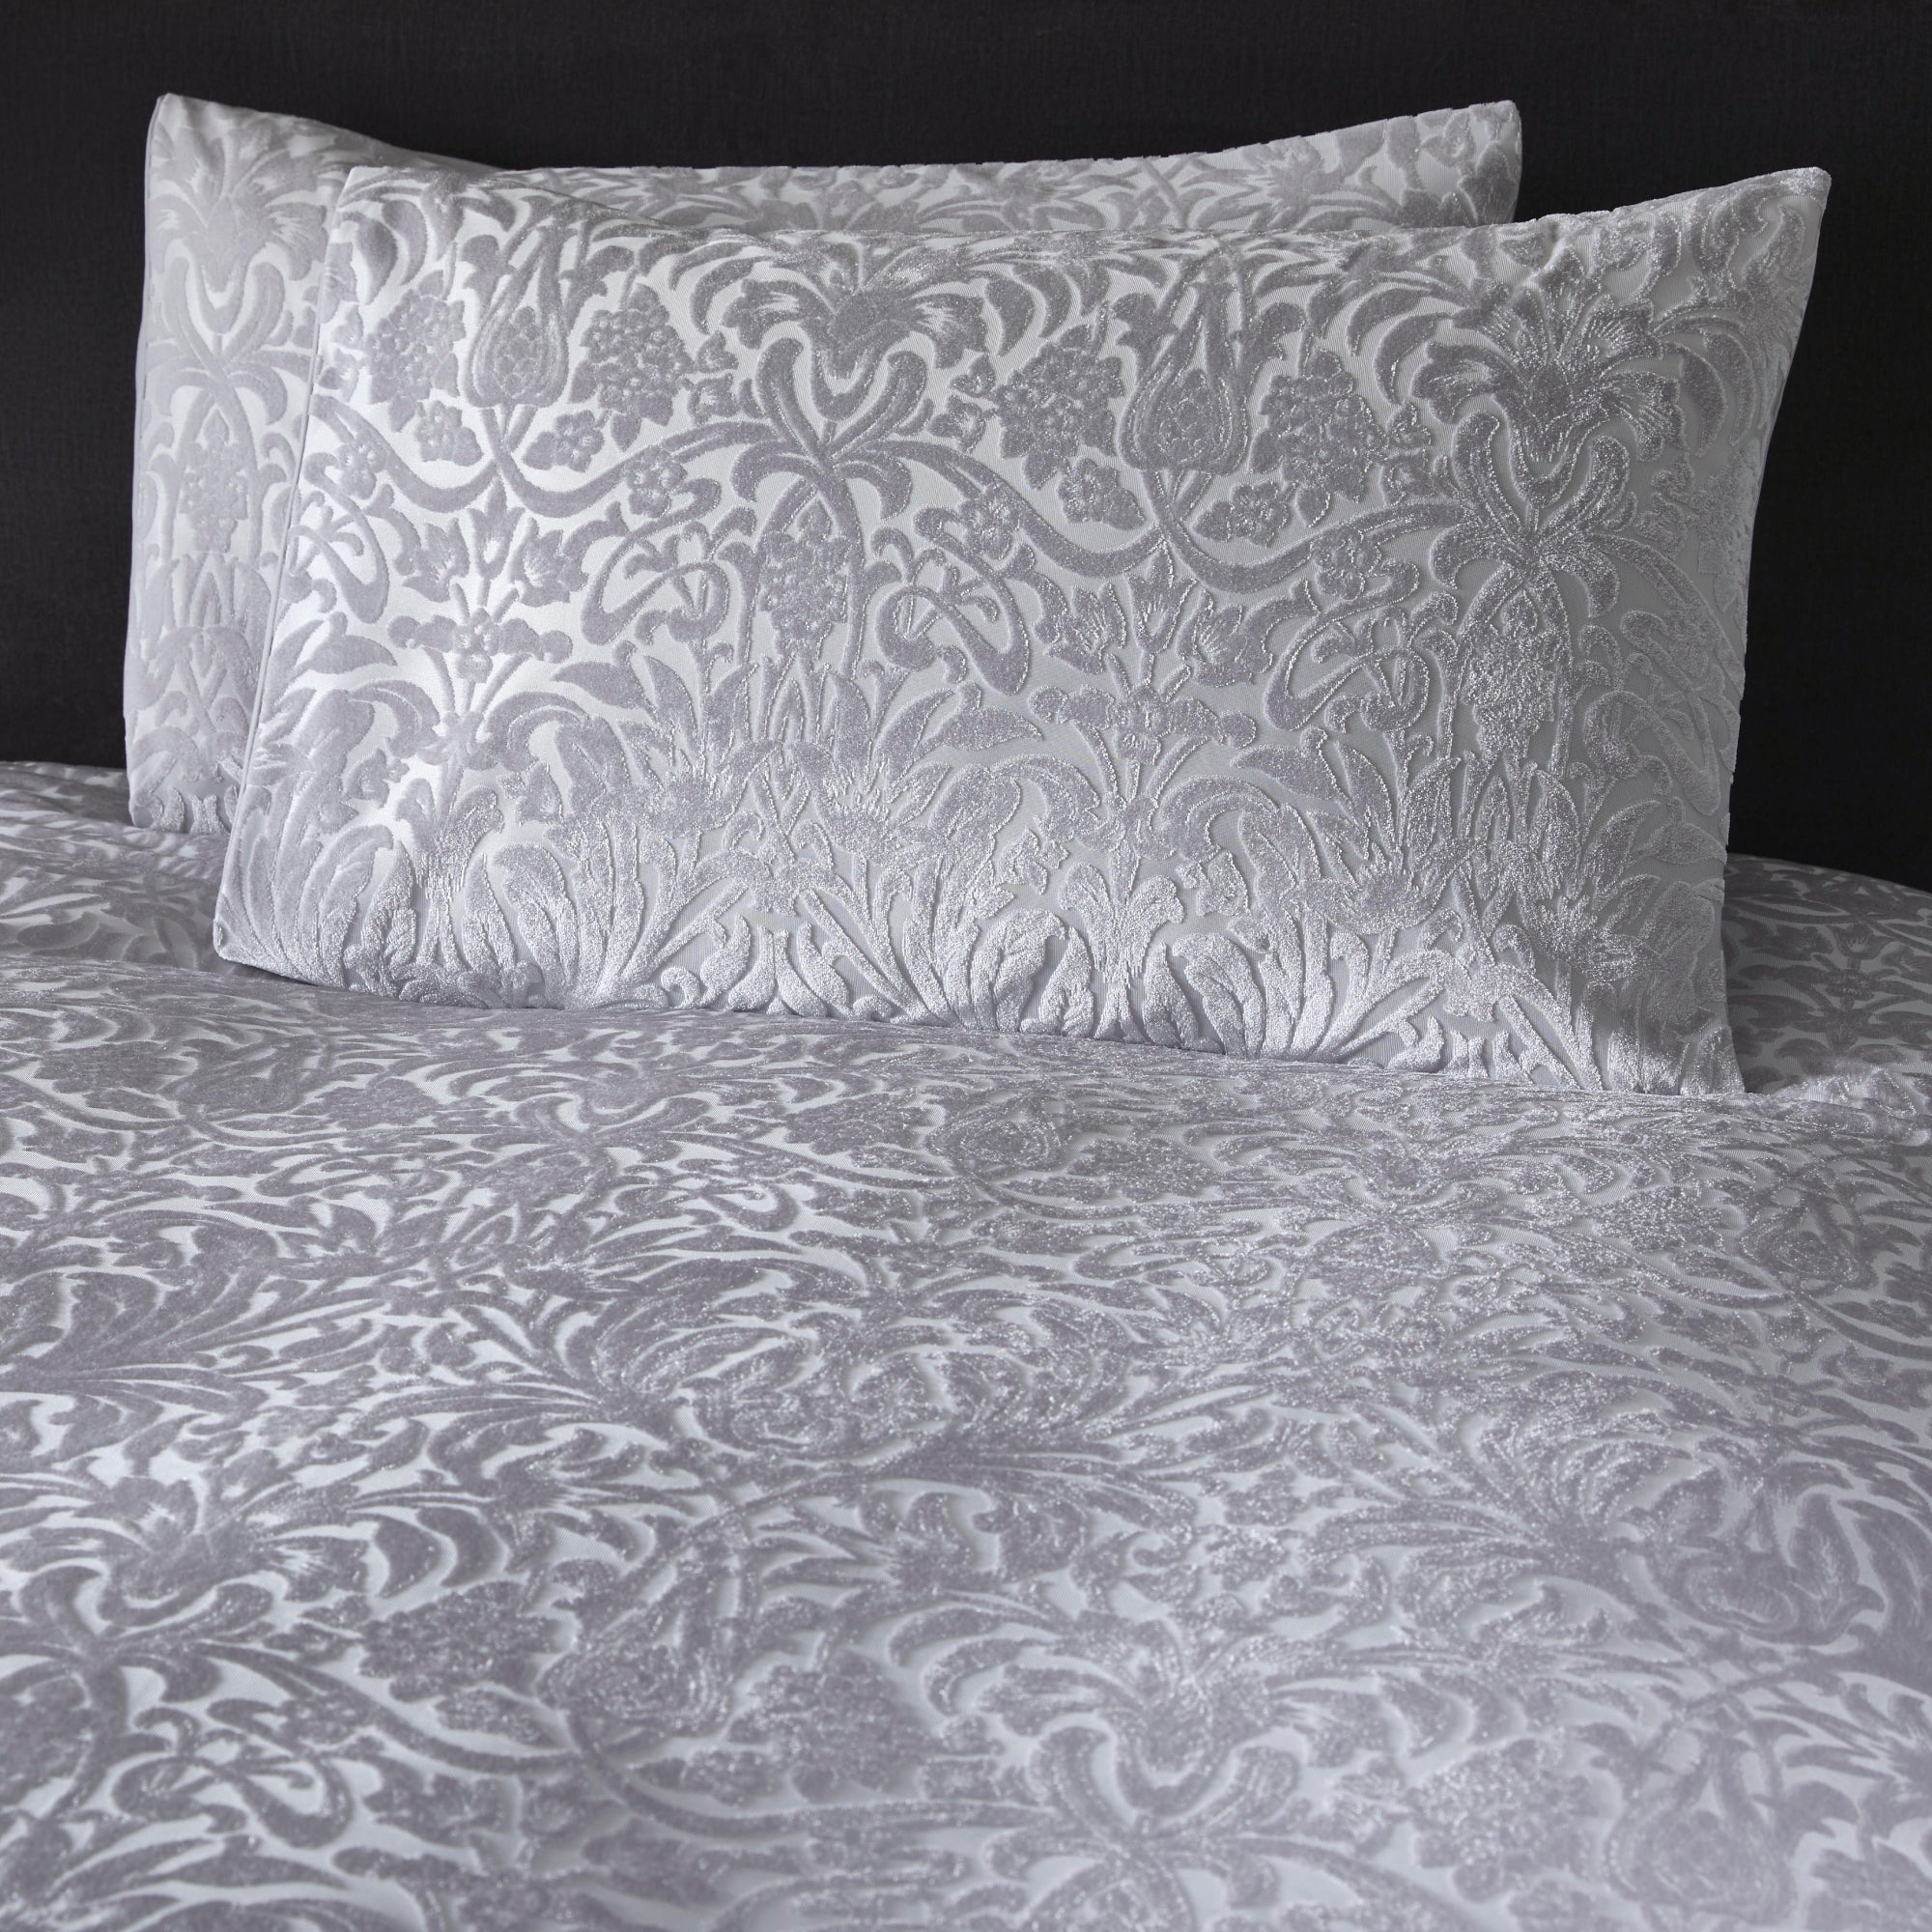 Duvet Cover Set Mirella by Soiree in Silver